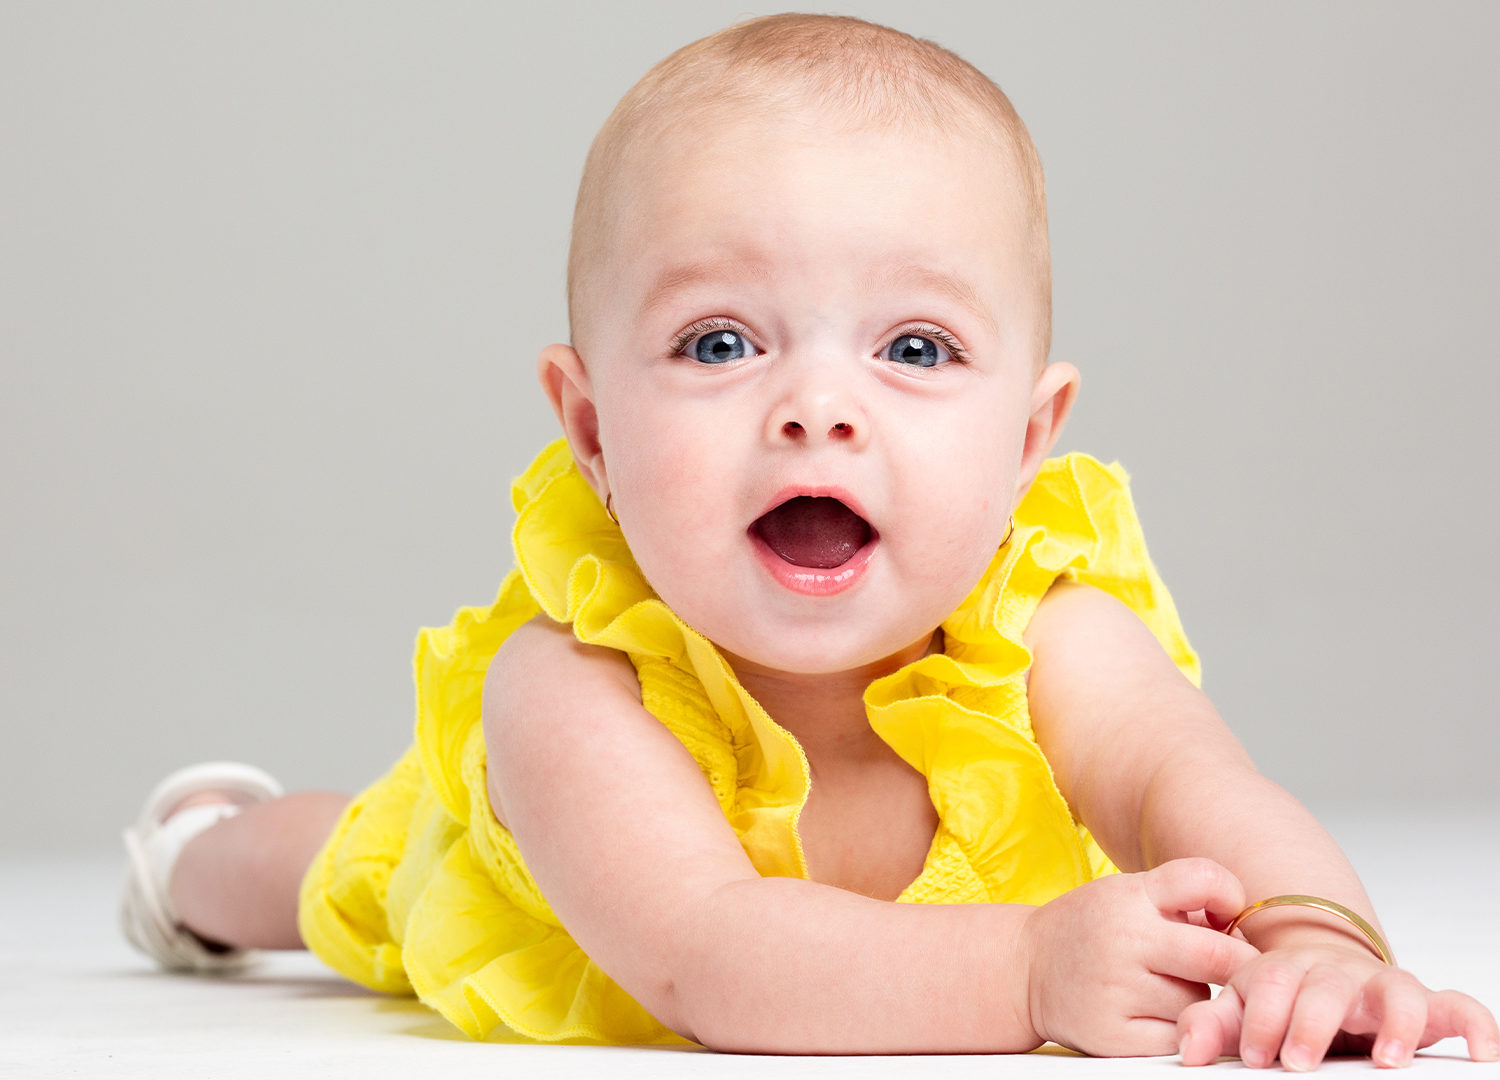 7 Baby Modelling Tips for Parents